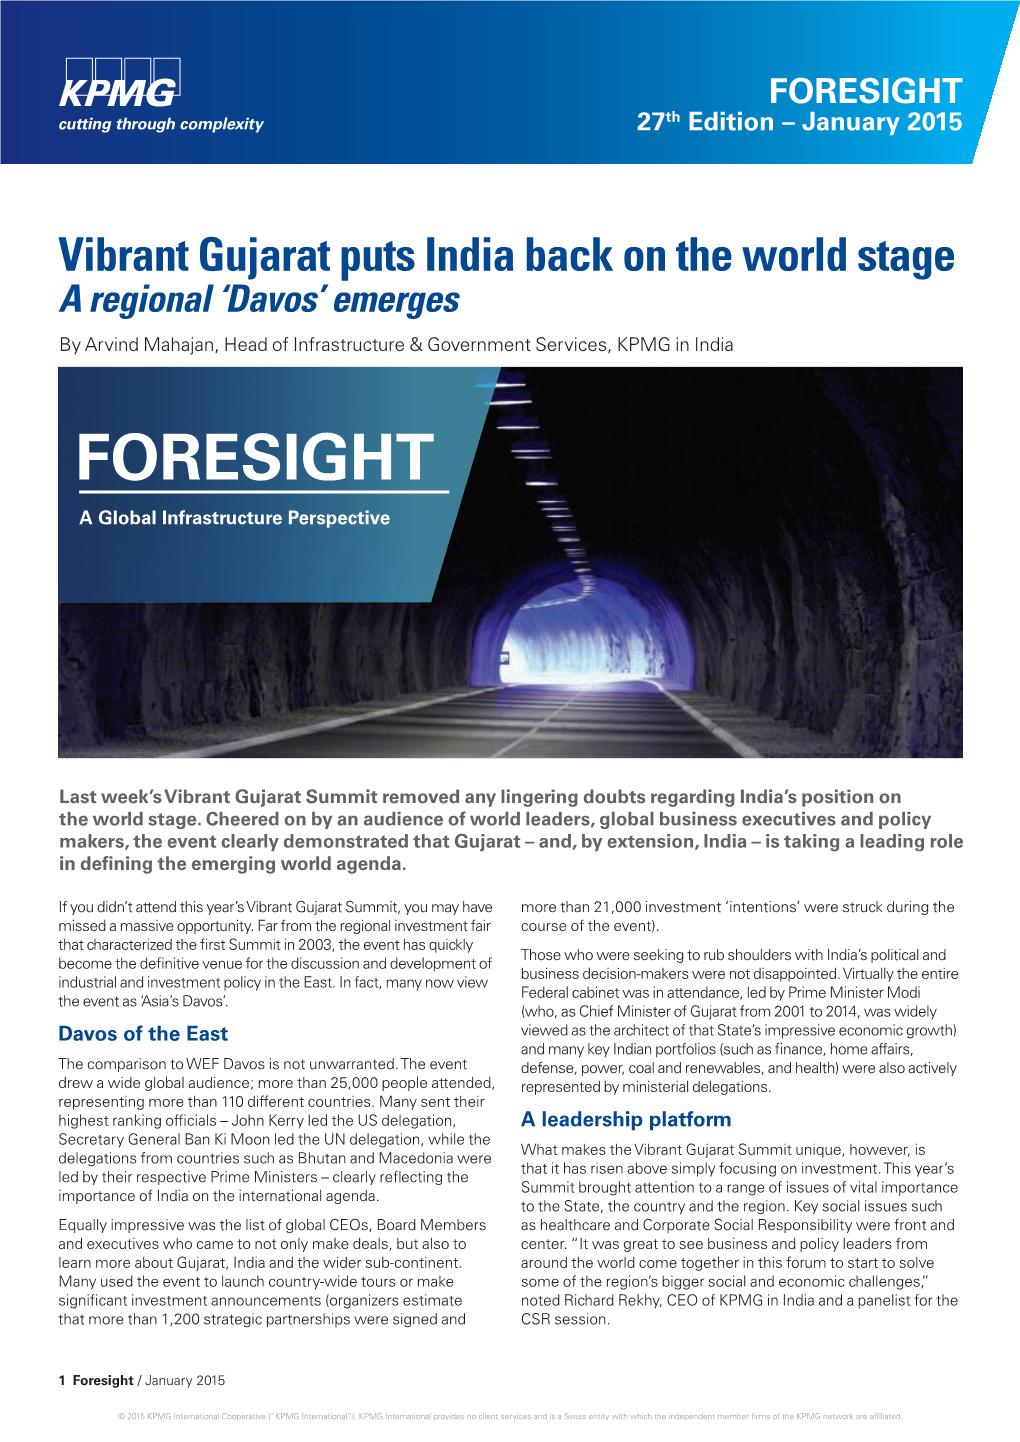 Vibrant Gujarat Puts India Back on the World Stage a Regional ‘Davos’ Emerges by Arvind Mahajan, Head of Infrastructure & Government Services, KPMG in India